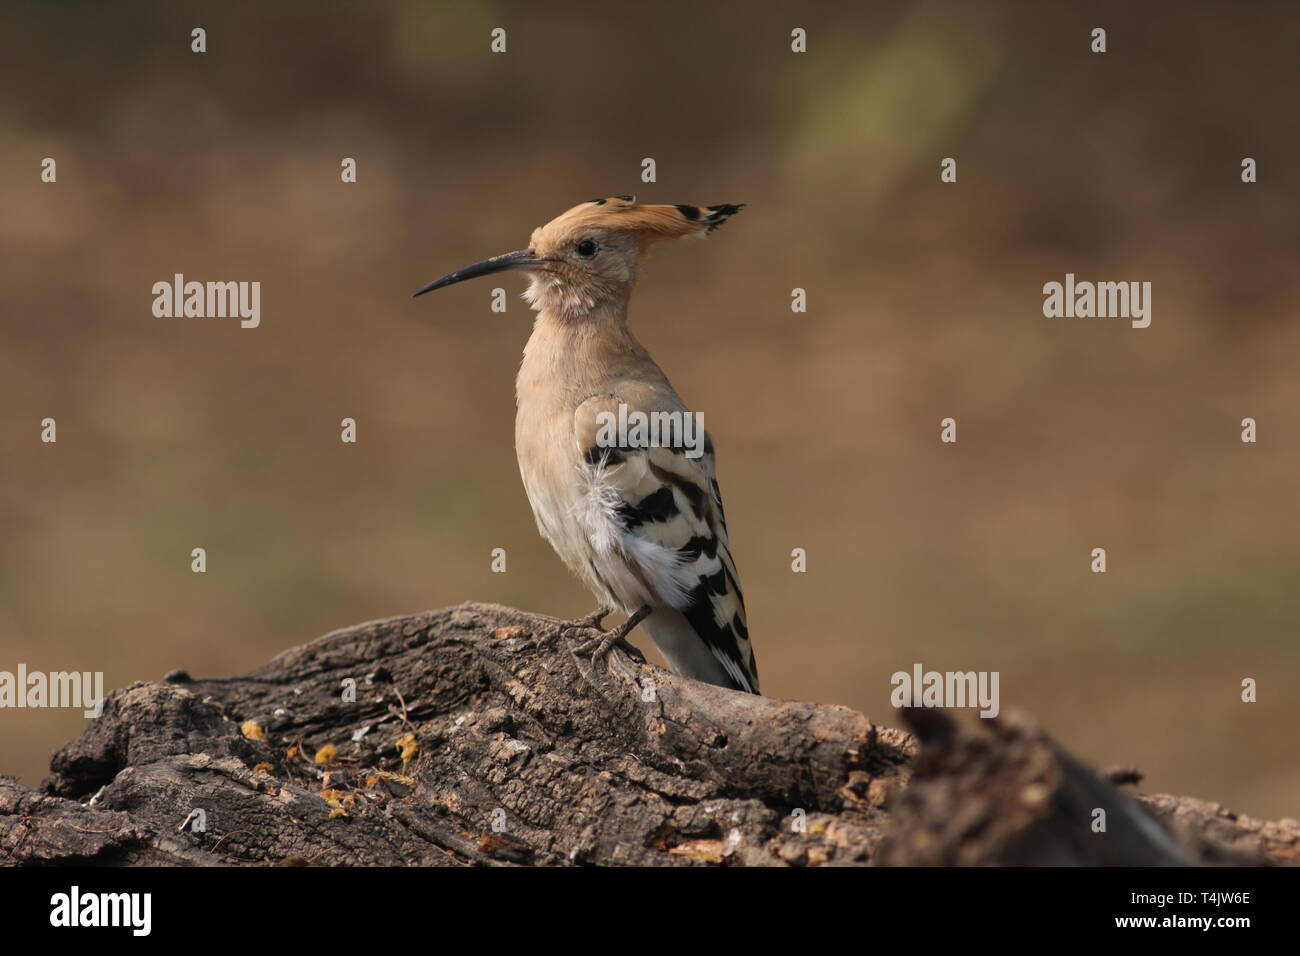 A hoopoe in winter in Keoladeo National Park, Rajasthan Stock Photo